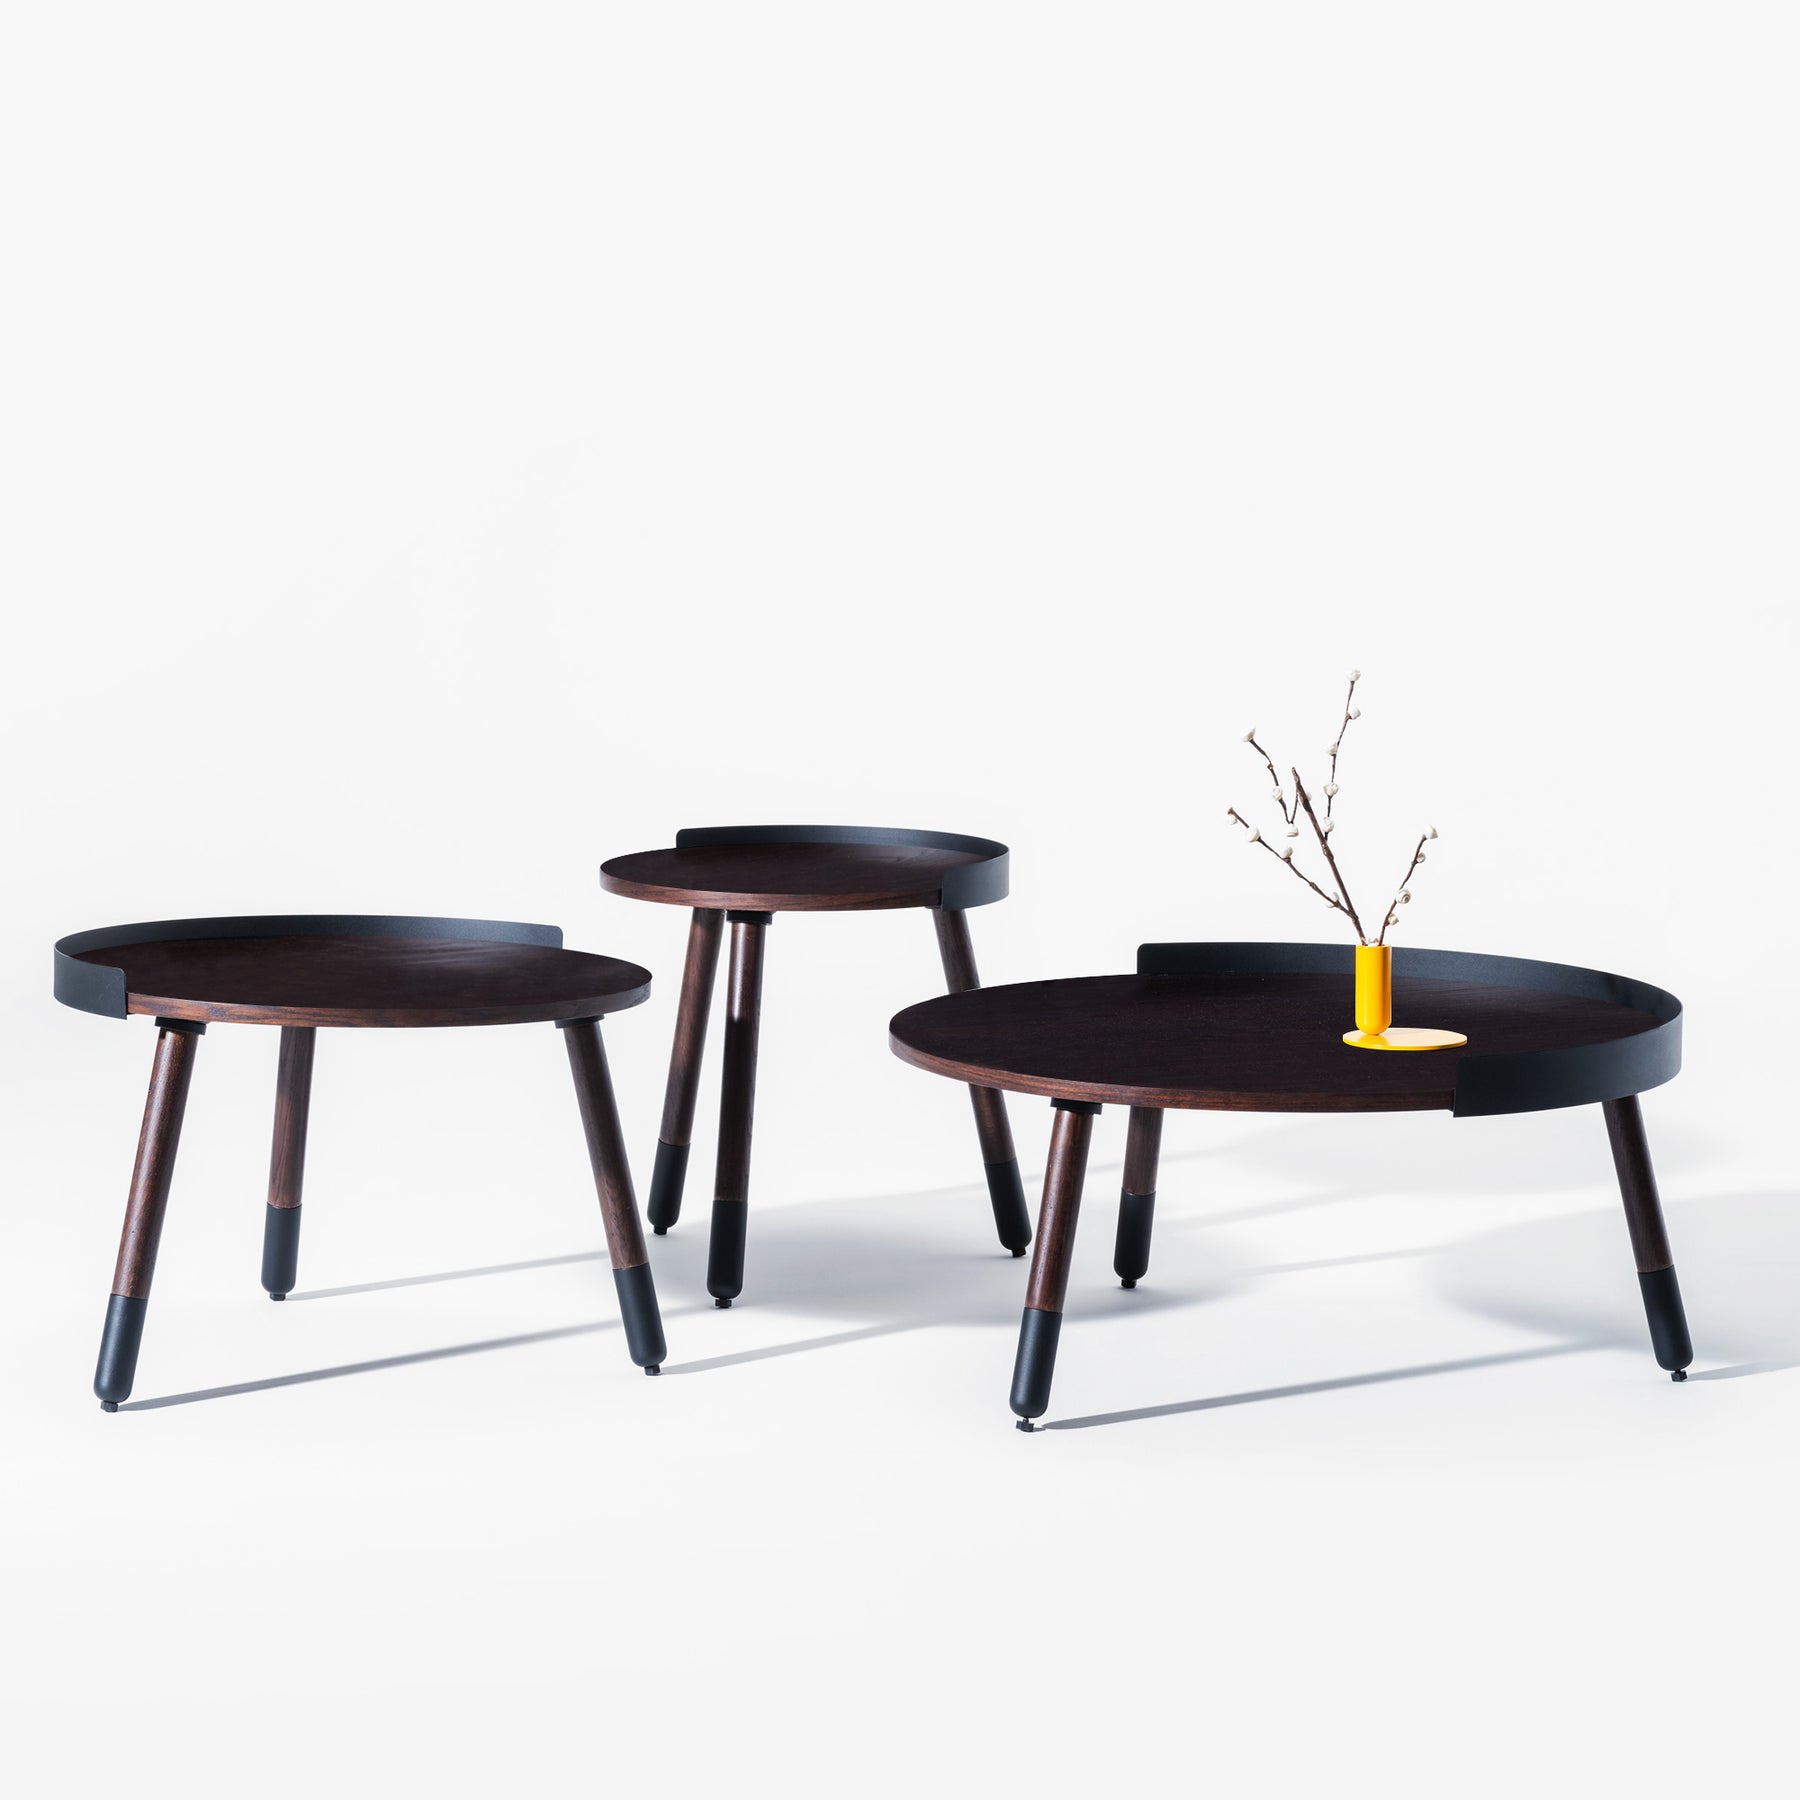 Ness Coffee Table (Small)